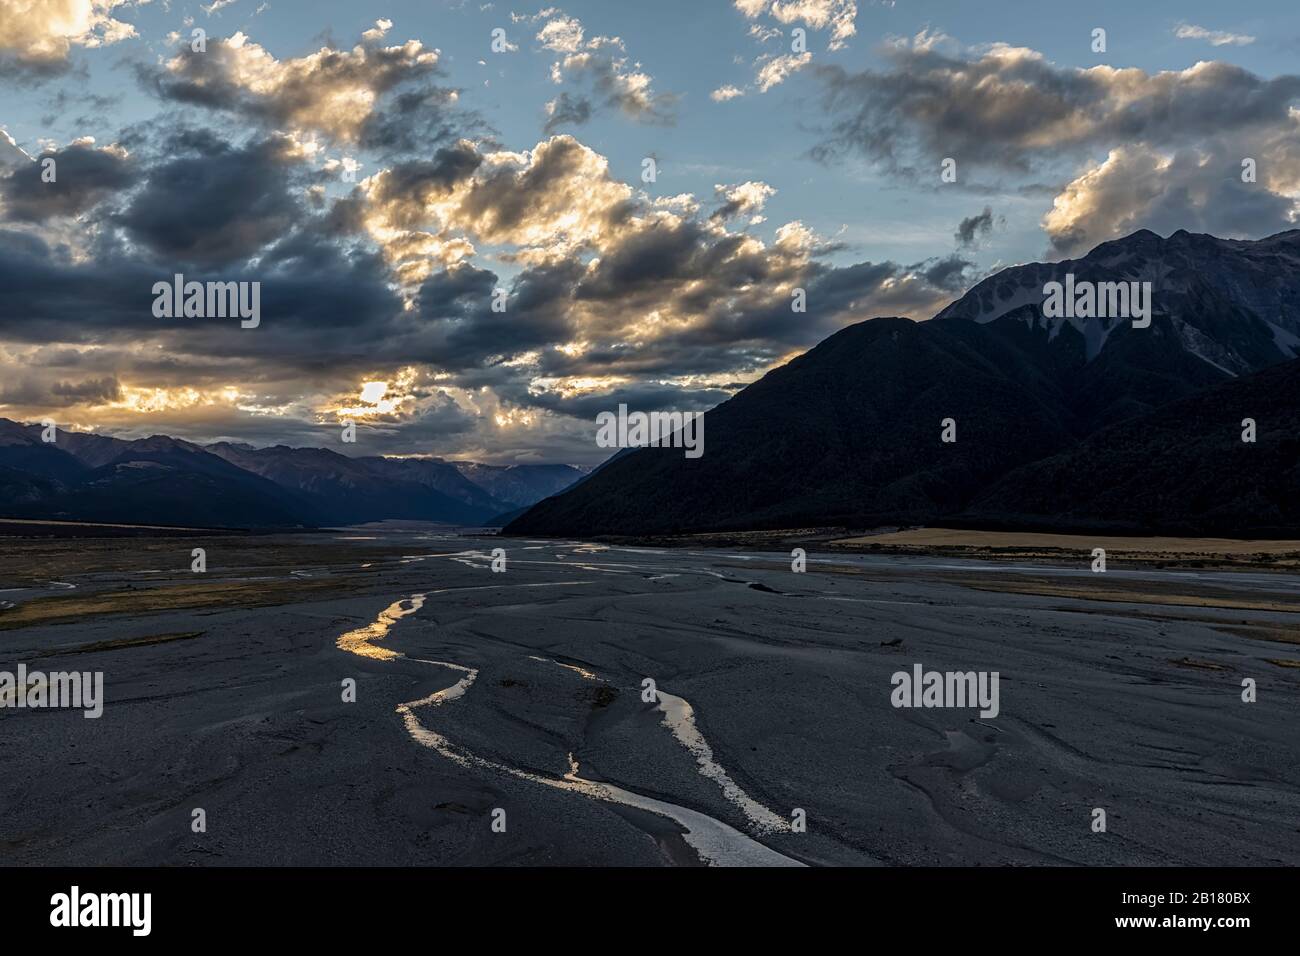 New Zealand, Grey District, Inchbonnie, Clouds over Waimakariri River in Arthurs Pass National Park at dusk Stock Photo